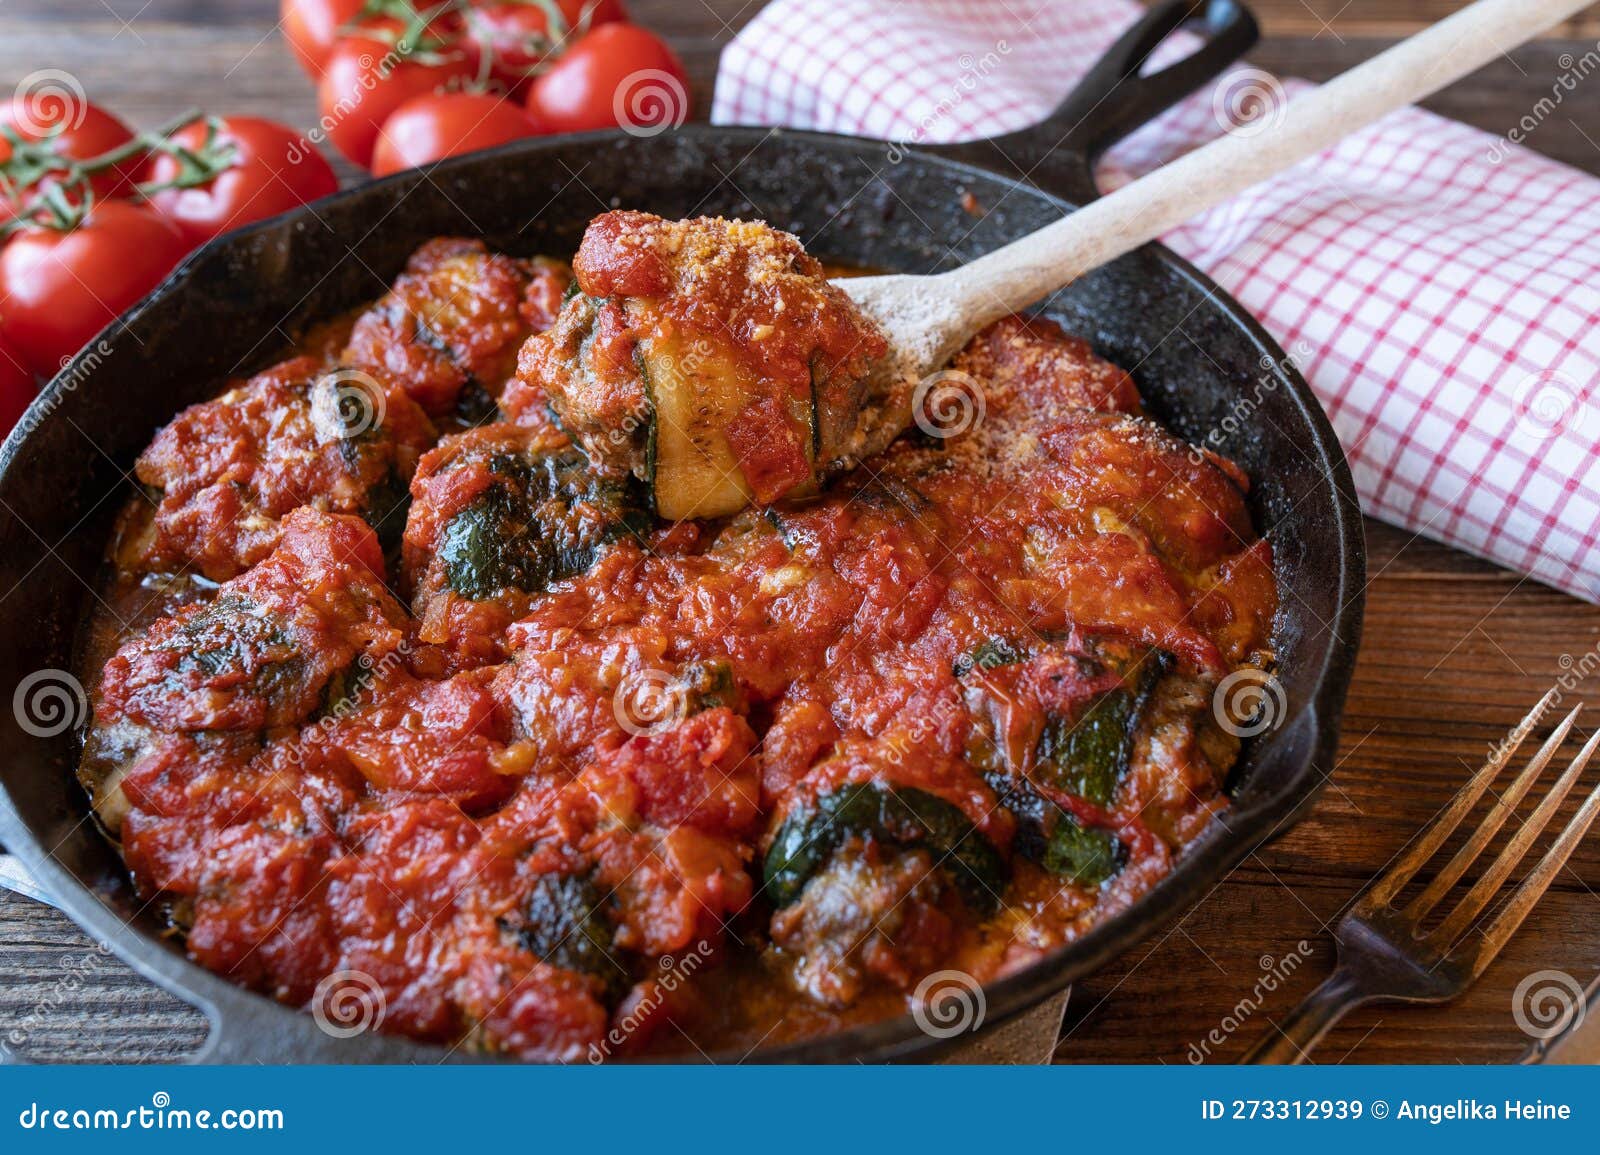 stuffed zucchini with ground beef in a delicious tomato sauce. italian roulades or involtini dish